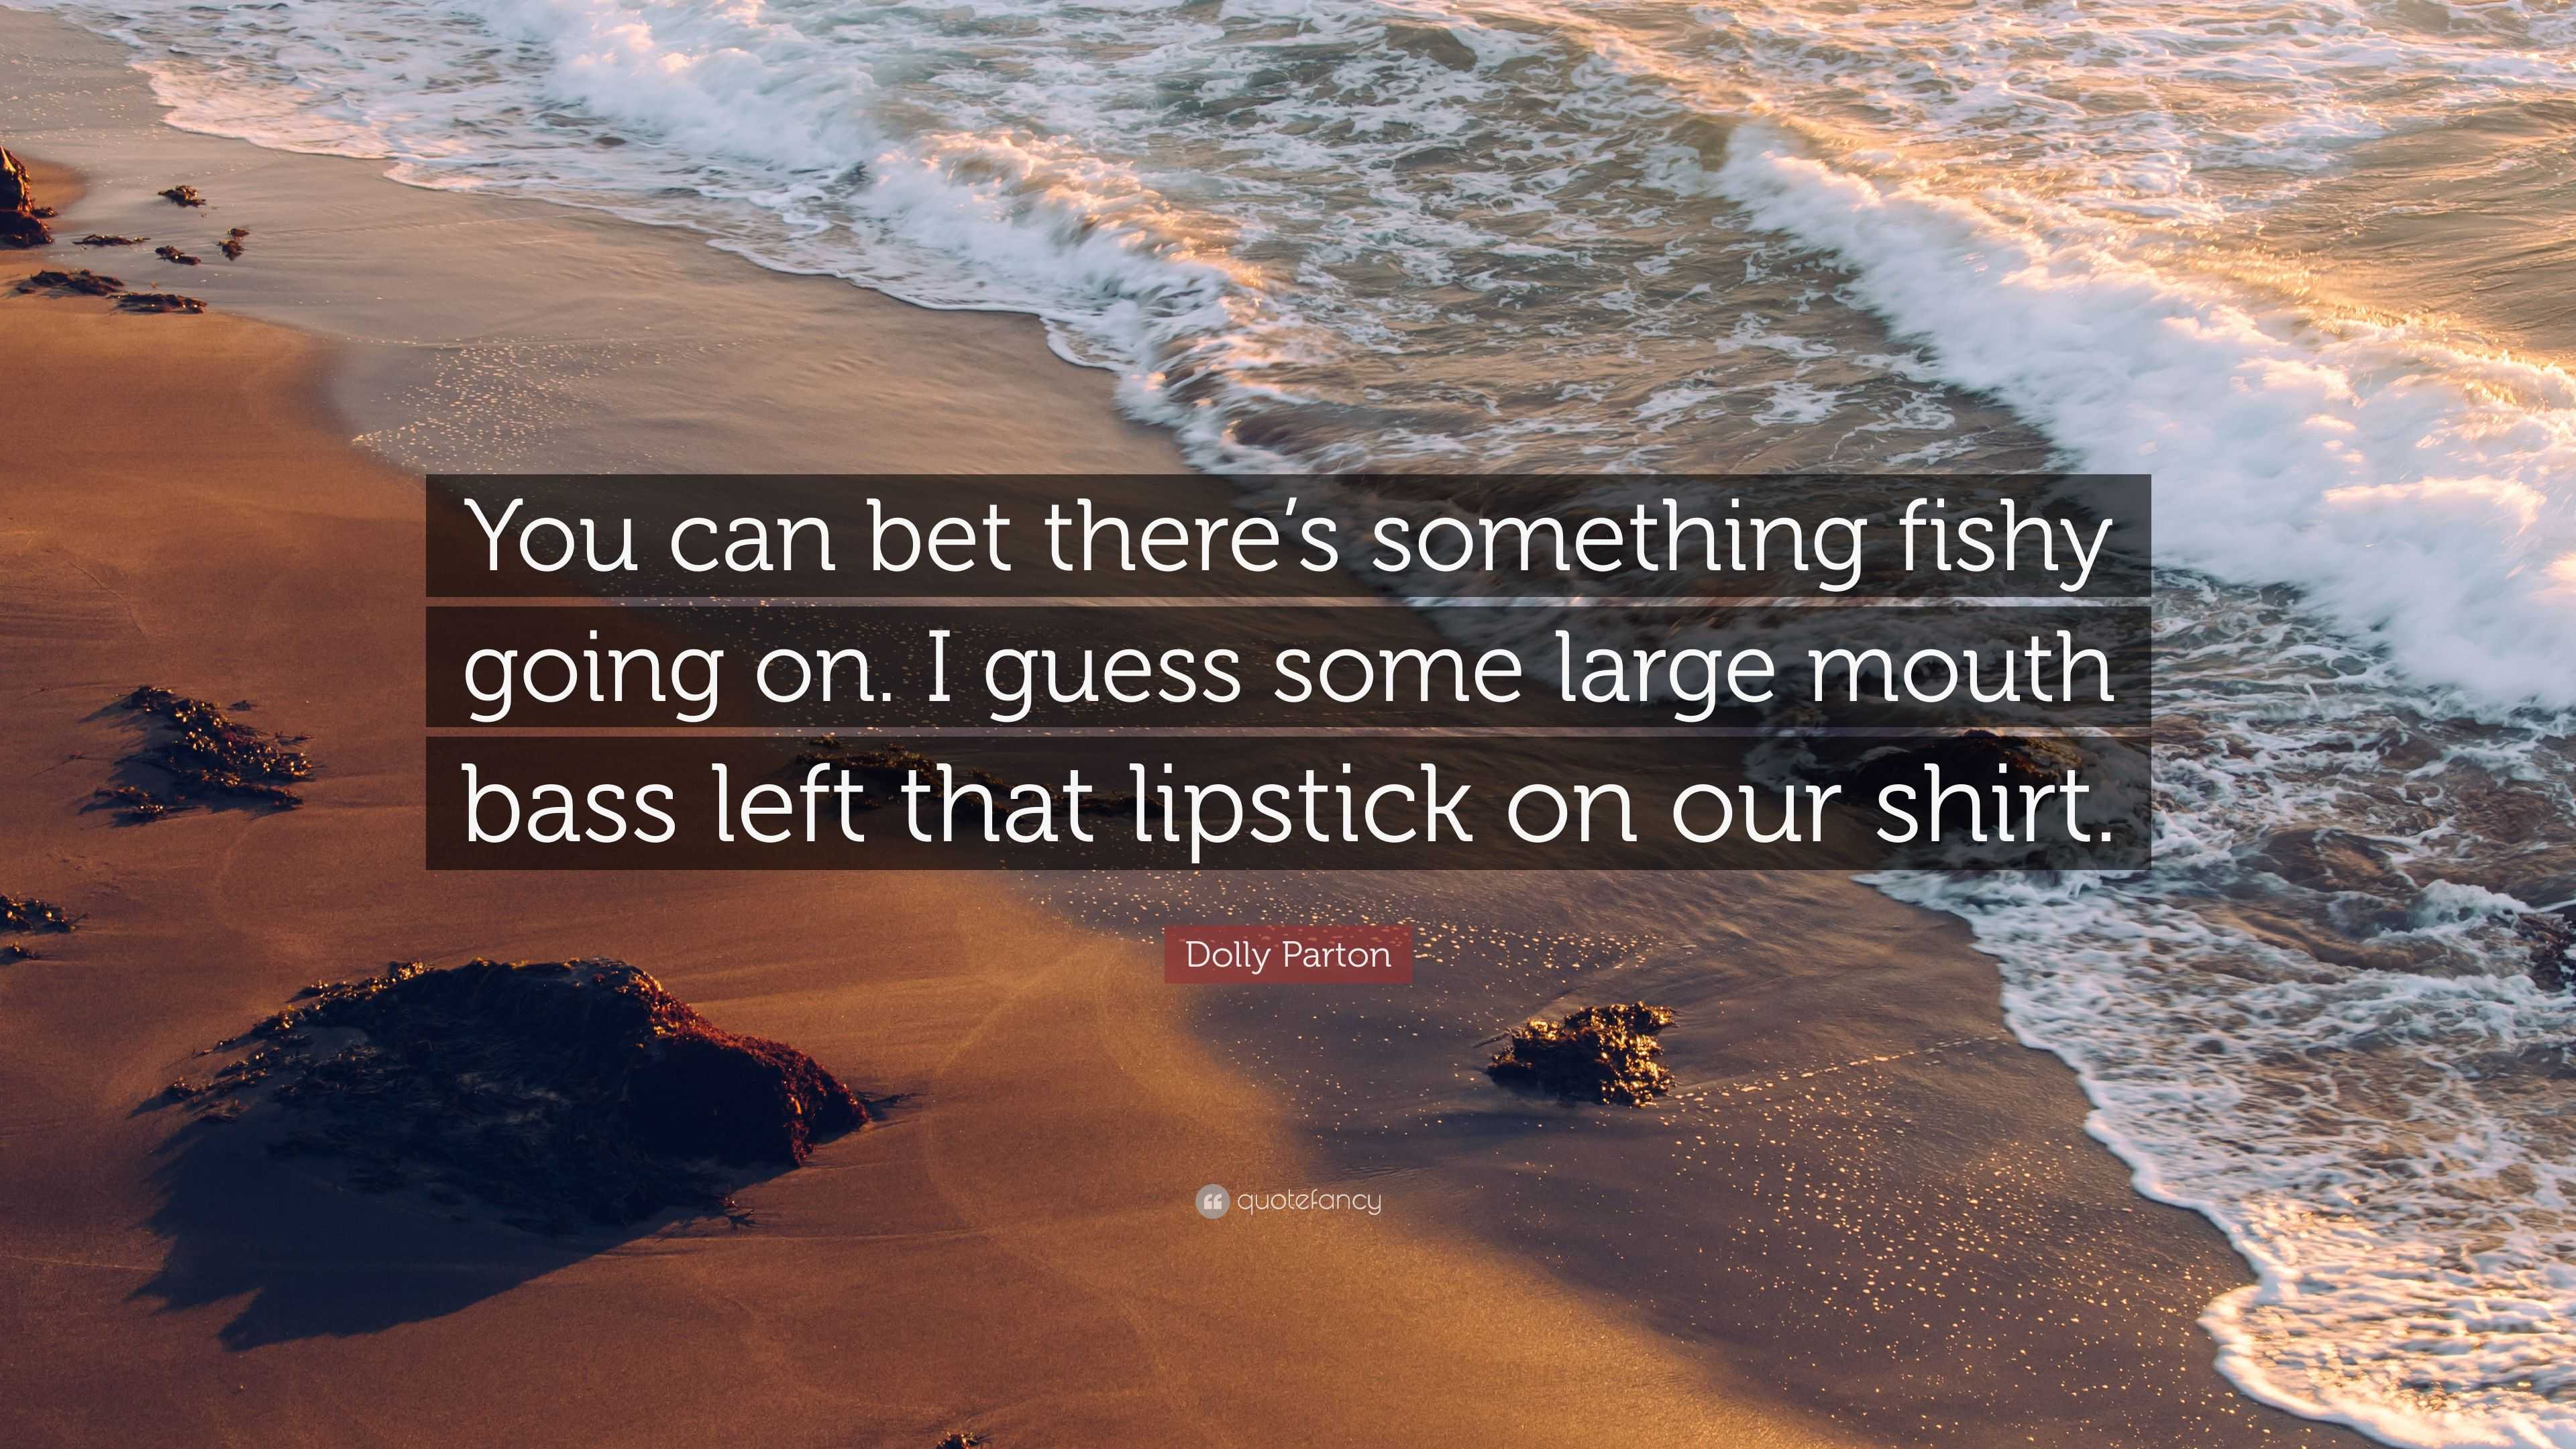 Dolly Parton Quote: “You can bet there's something fishy going on. I guess  some large mouth